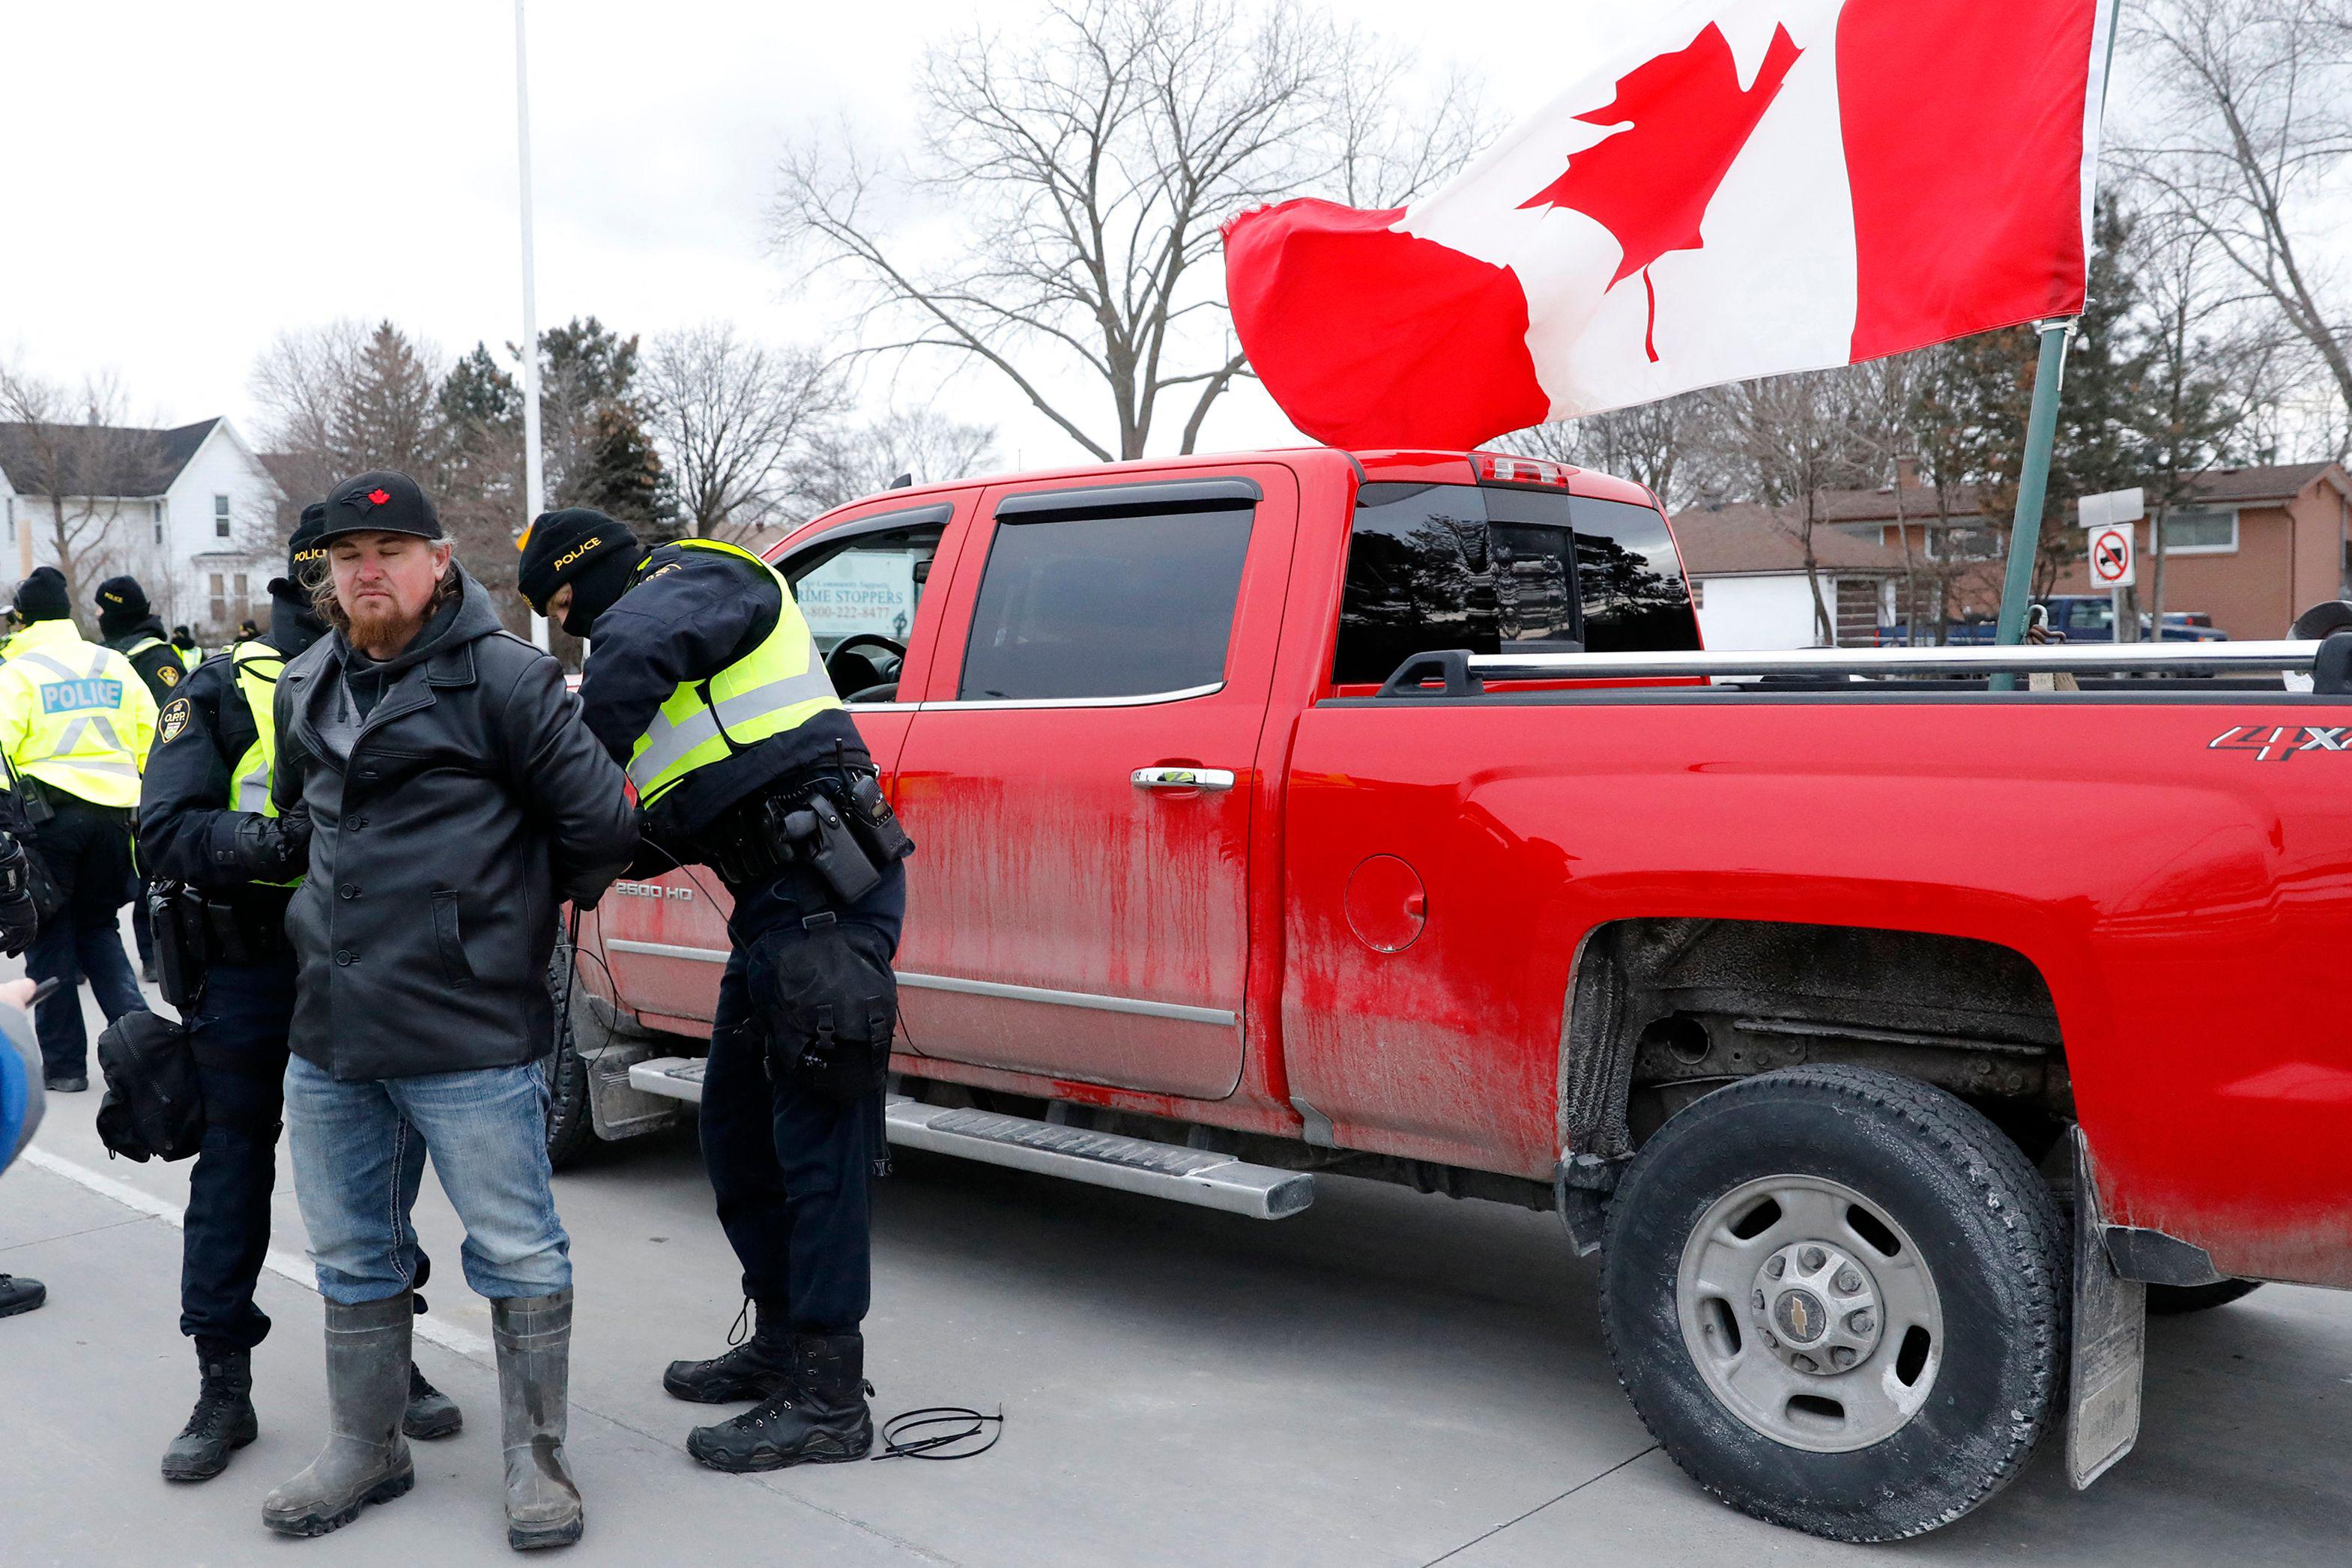 Police detain a protester as they clear demonstrators against COVID-19 vaccine mandates who blocked the entrance to the Ambassador Bridge in Windsor, Ontario, Canada, on February 13, 2022.